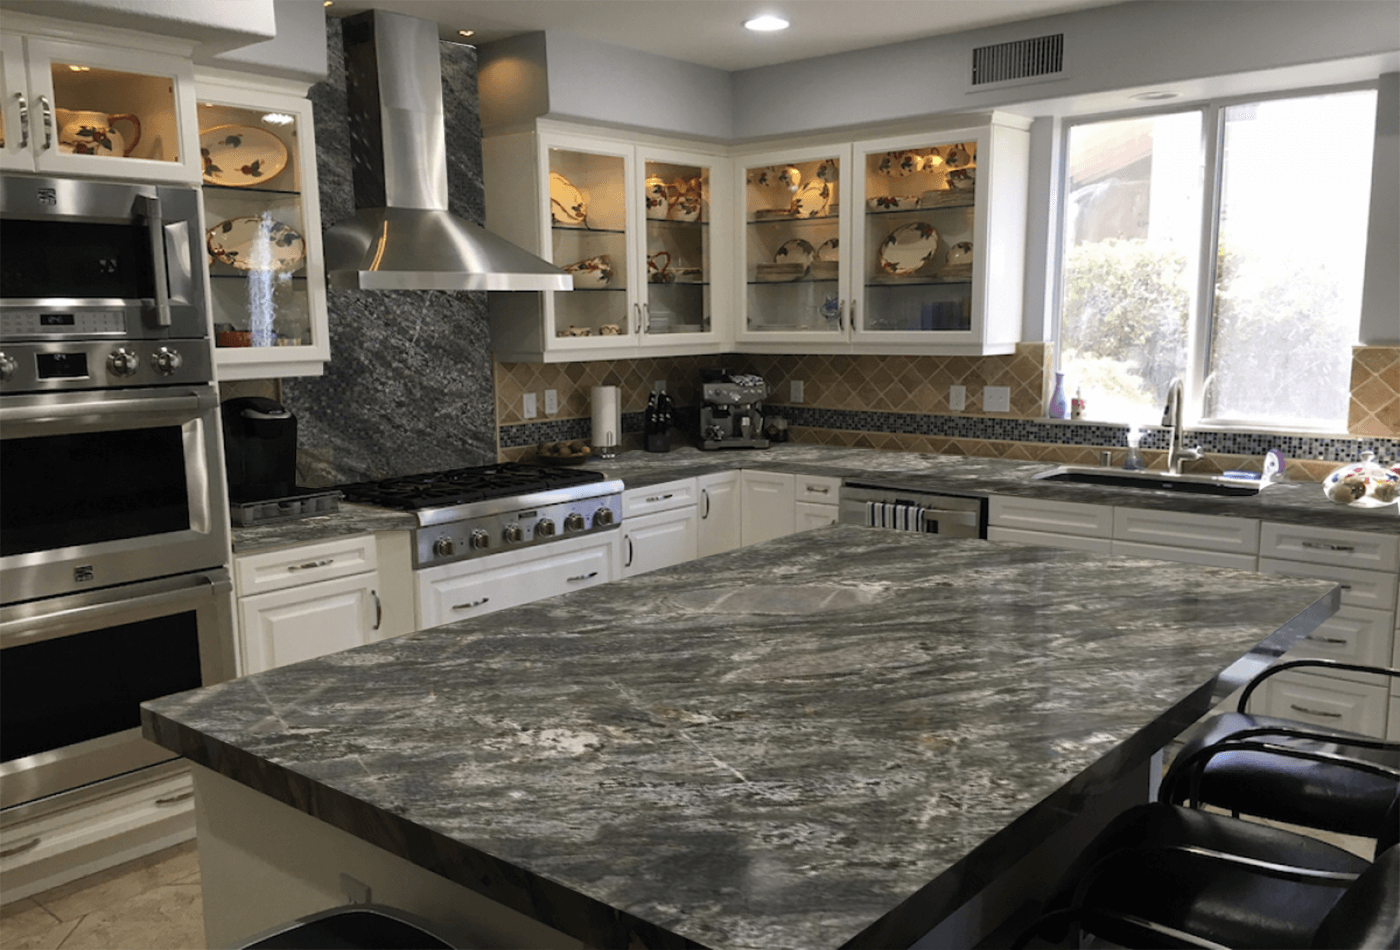 Style your Backsplash with Verde Granite Counters